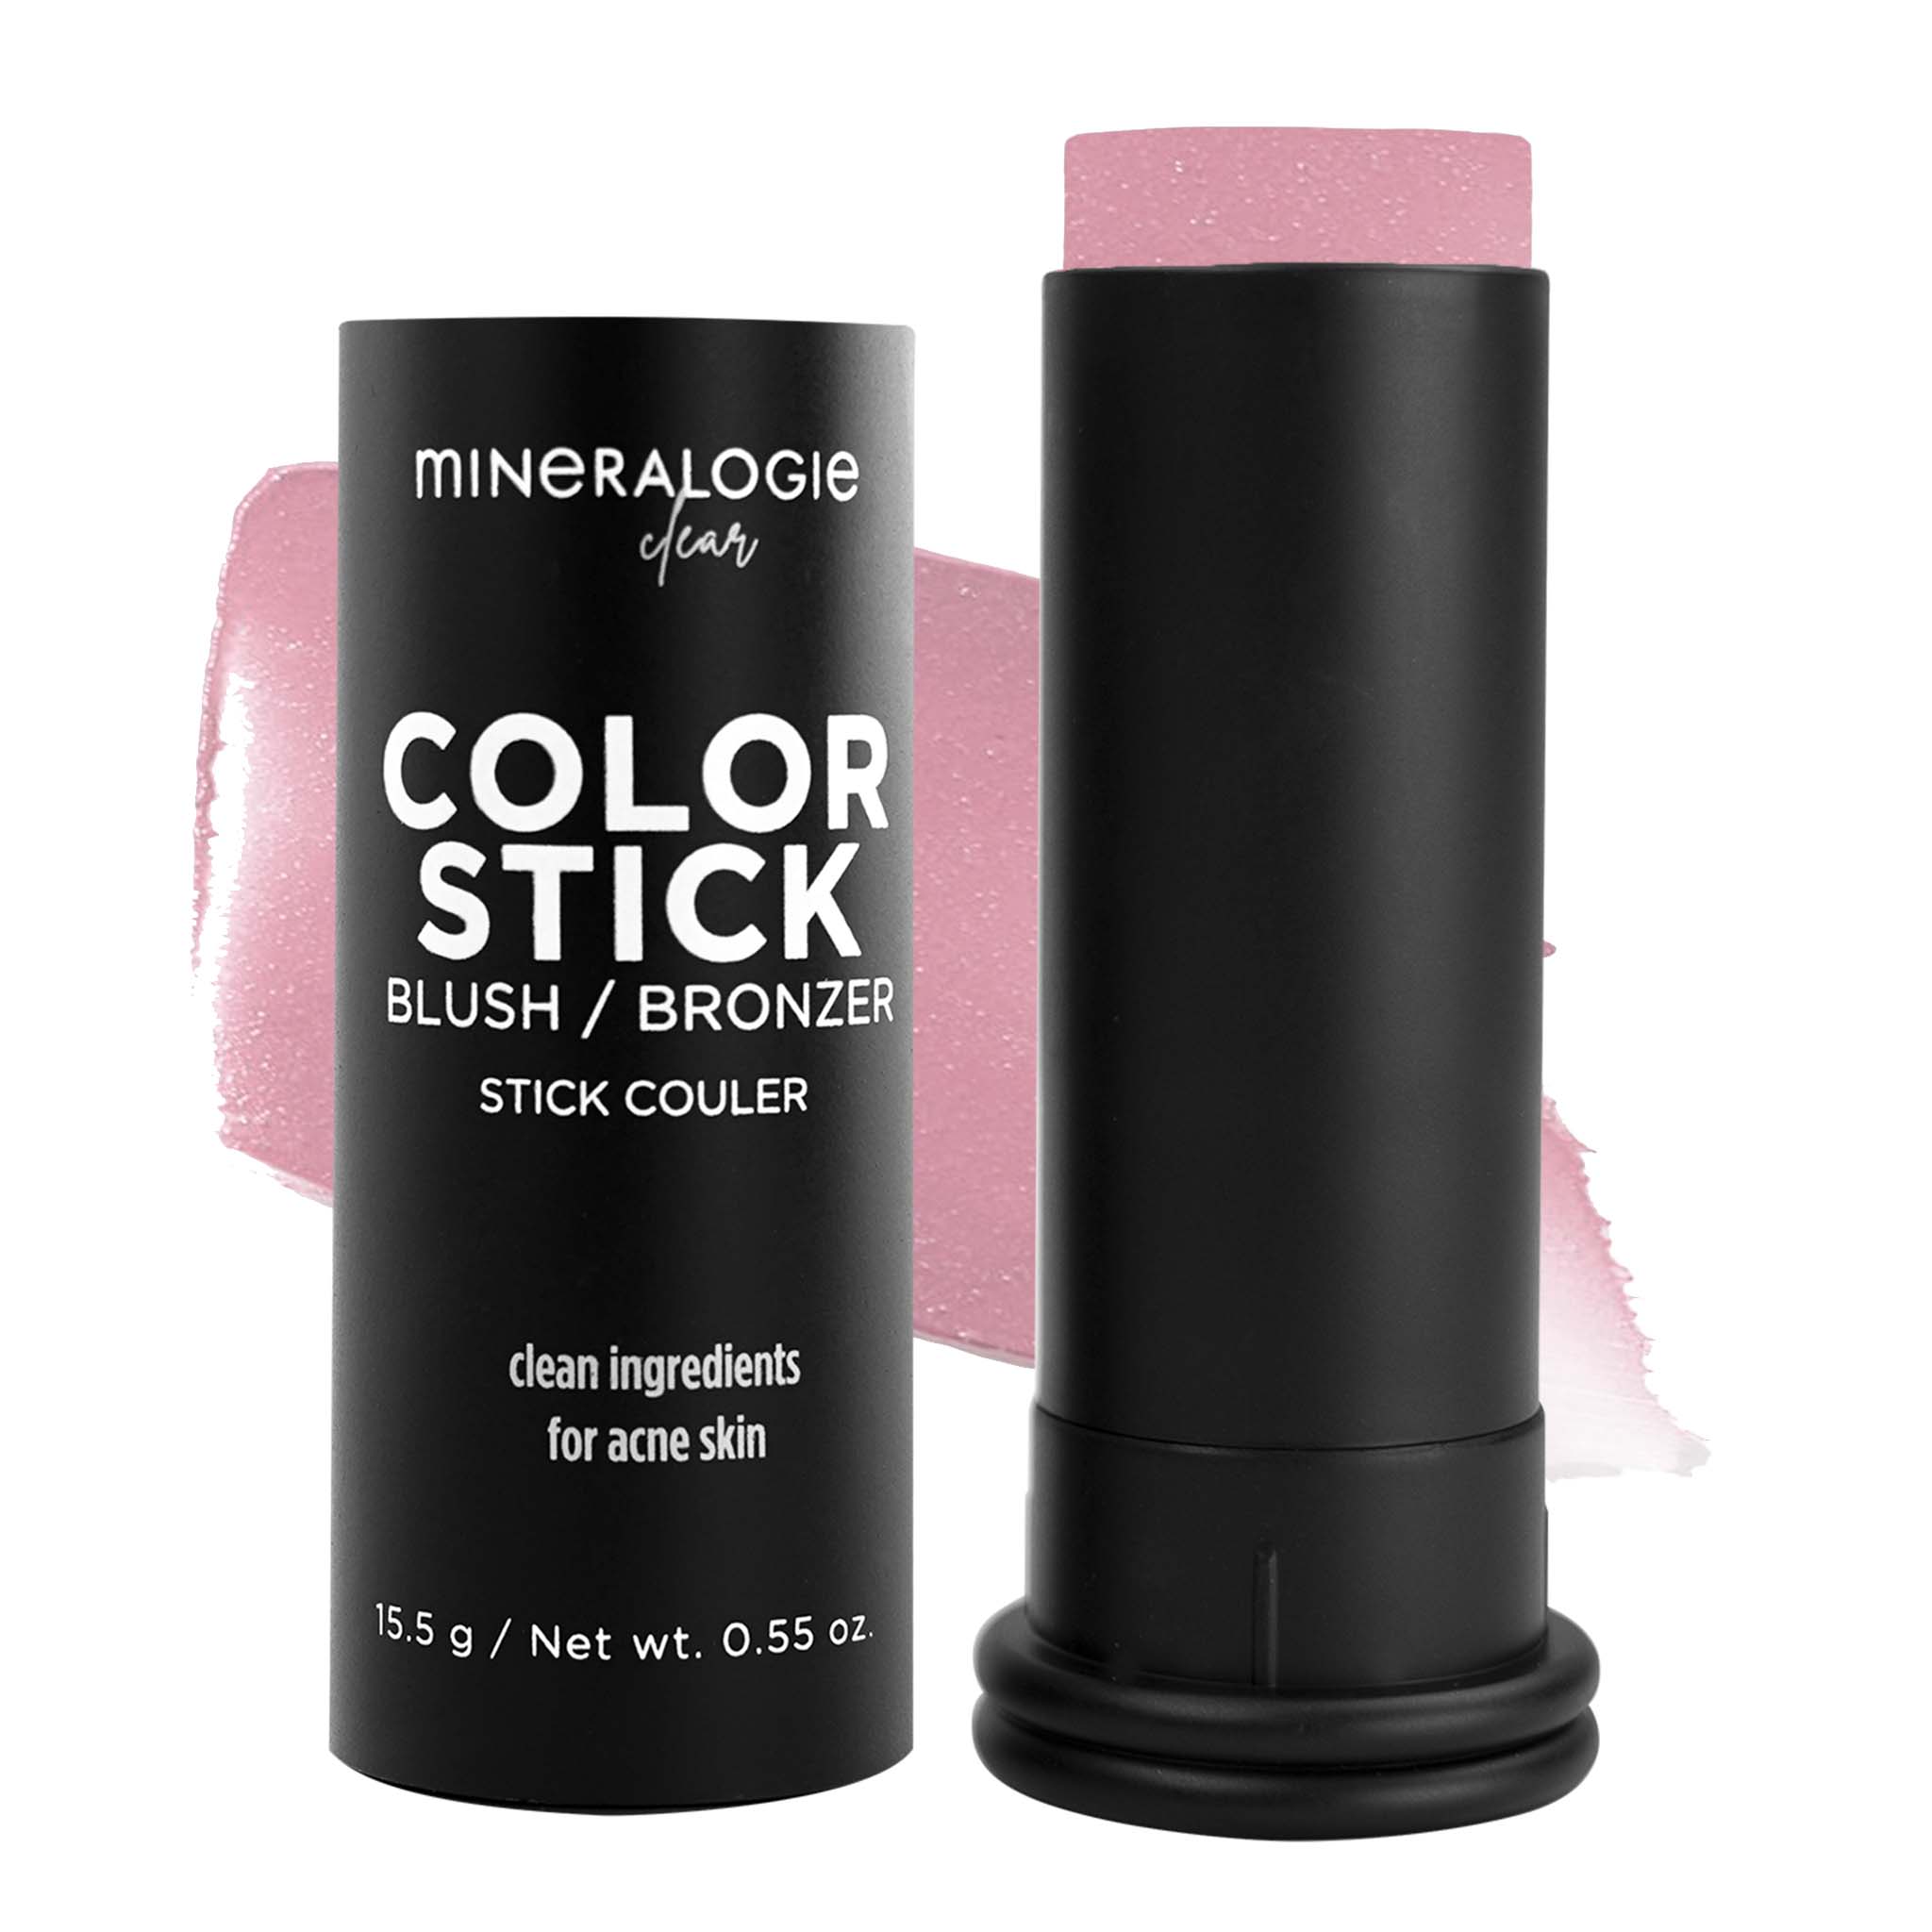 CLEAR Color Stick by Minerologie